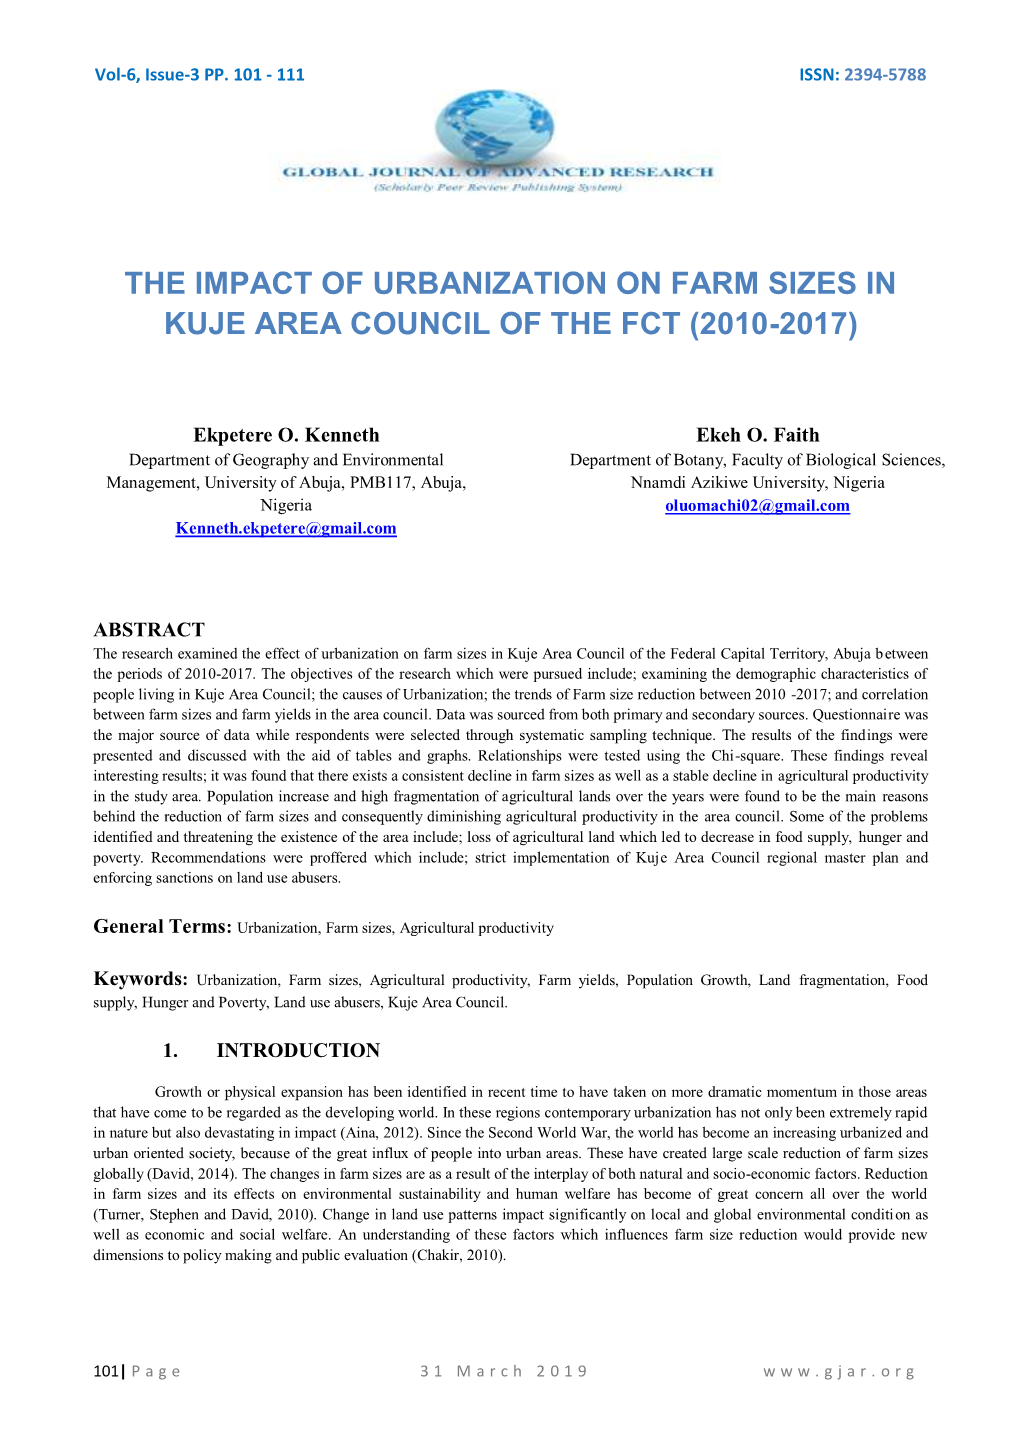 The Impact of Urbanization on Farm Sizes in Kuje Area Council of the Fct (2010-2017)